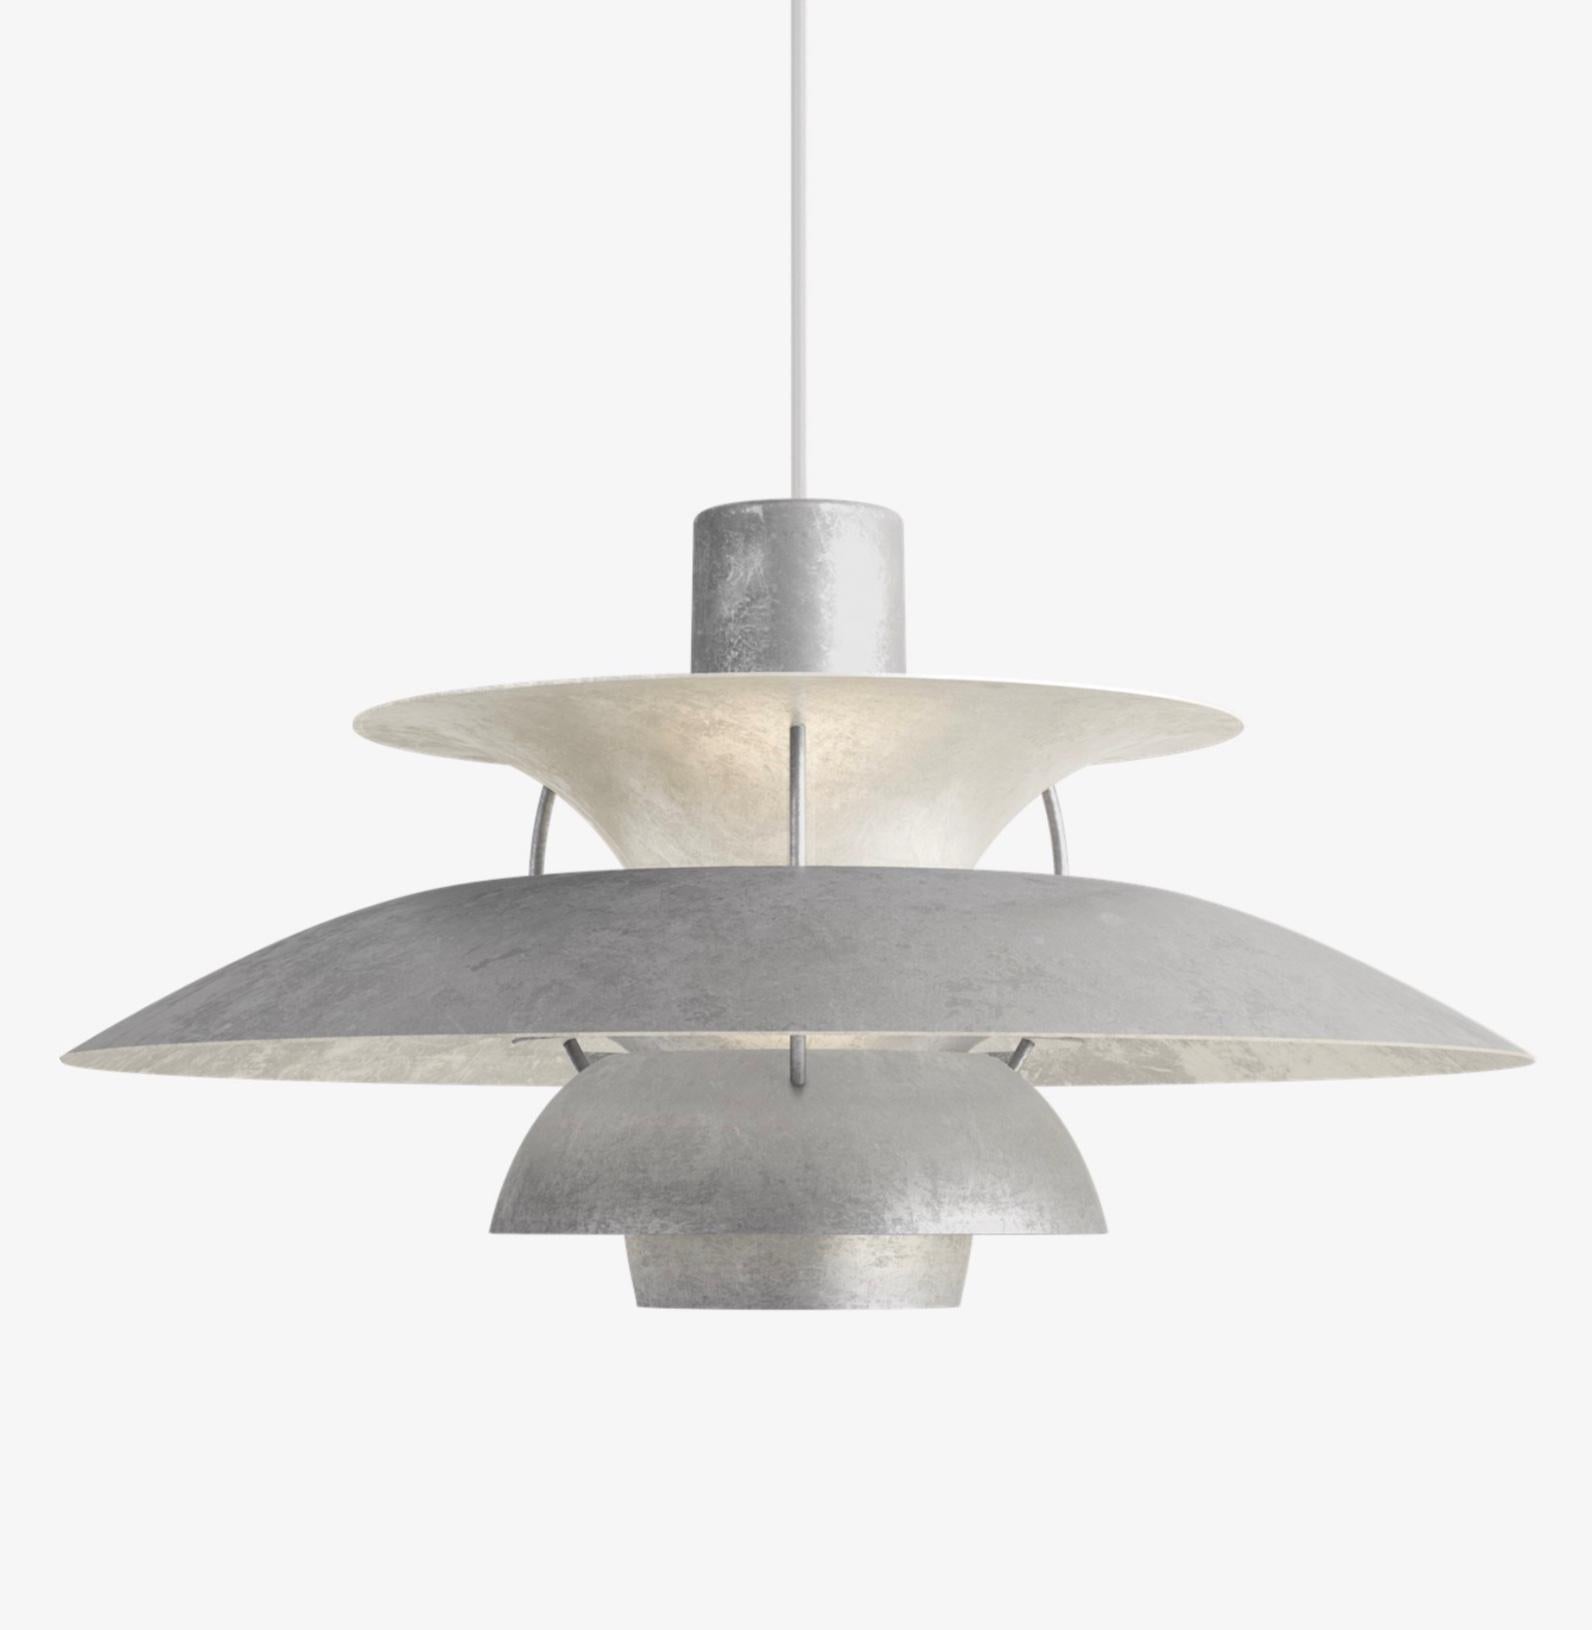 Poul Henningsen PH5 Retake in naked metal for Louis Poulsen. Designed in 1958. New, current production.

With a firm belief in recycling and upcycling, Louis Poulsen is continuously working on new ways of reusing products and materials. This